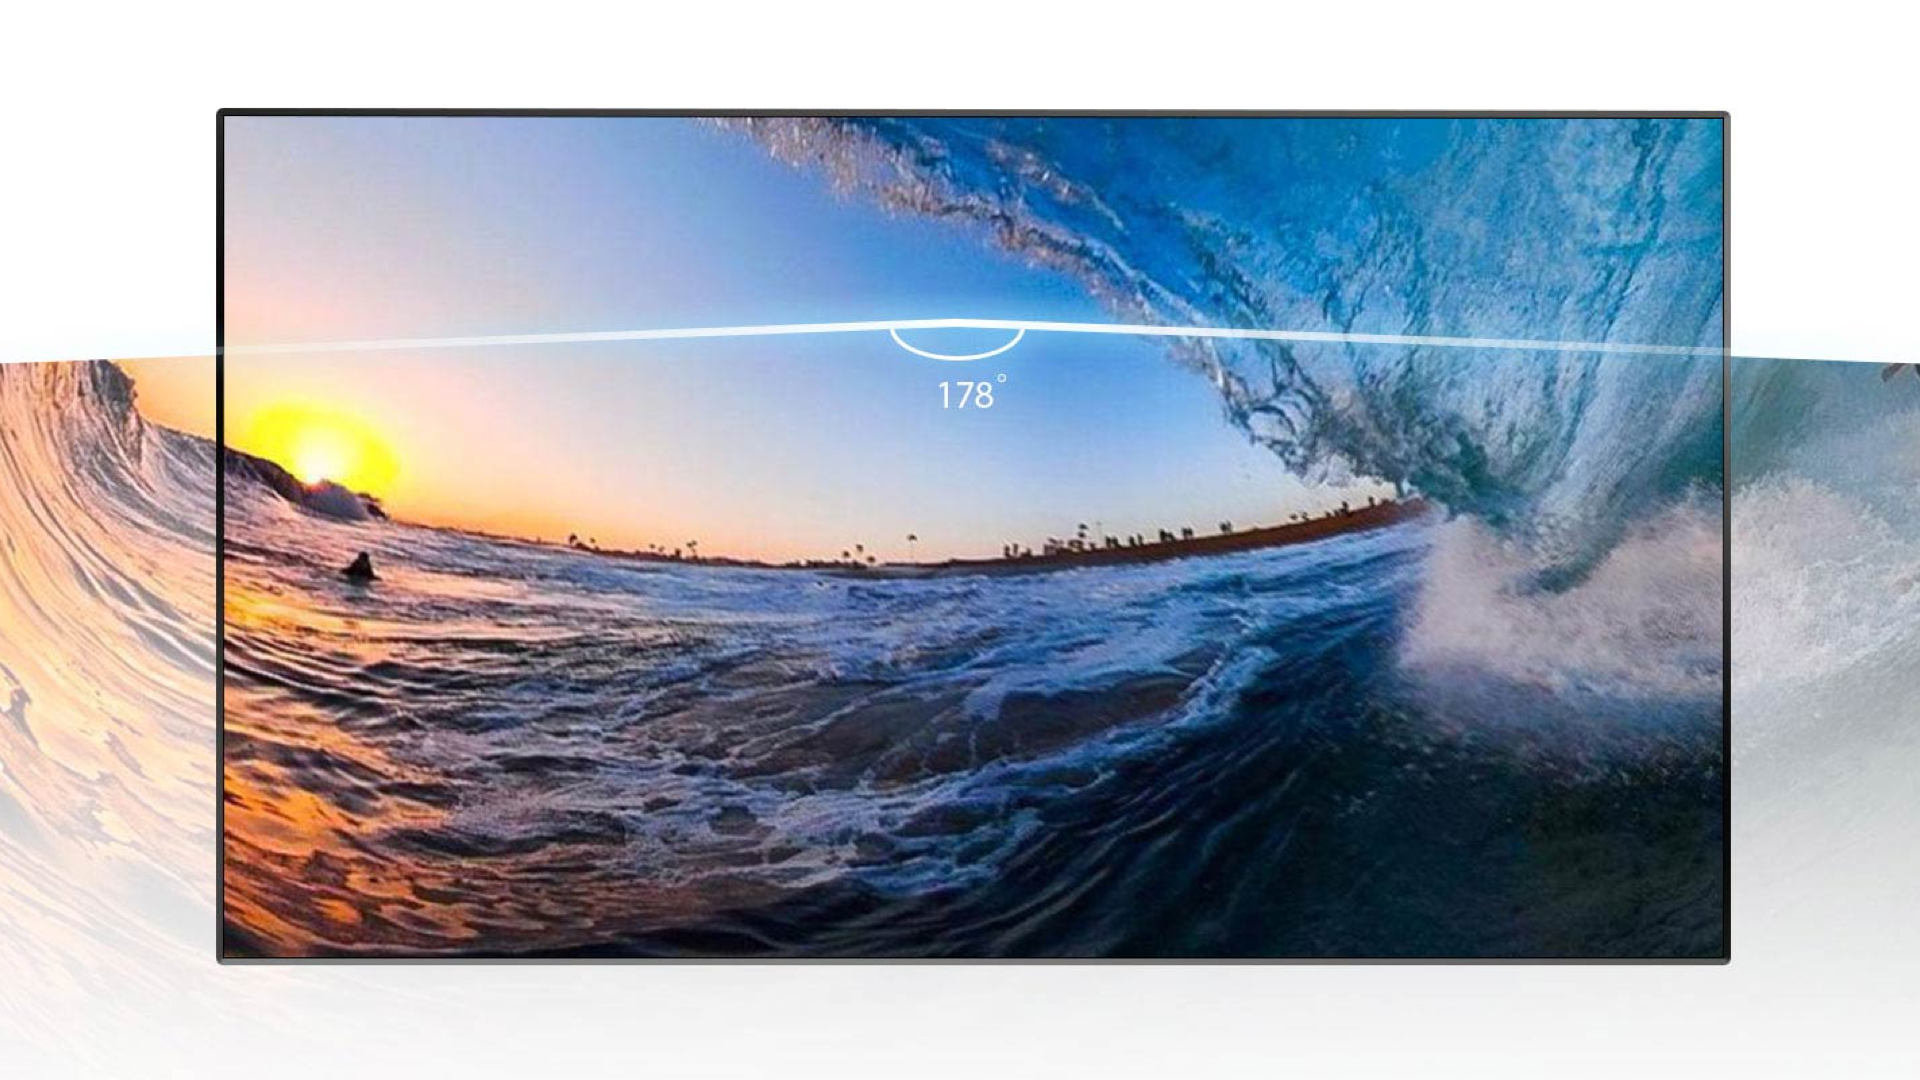 TCL Android tv S5200 wide viewing angle